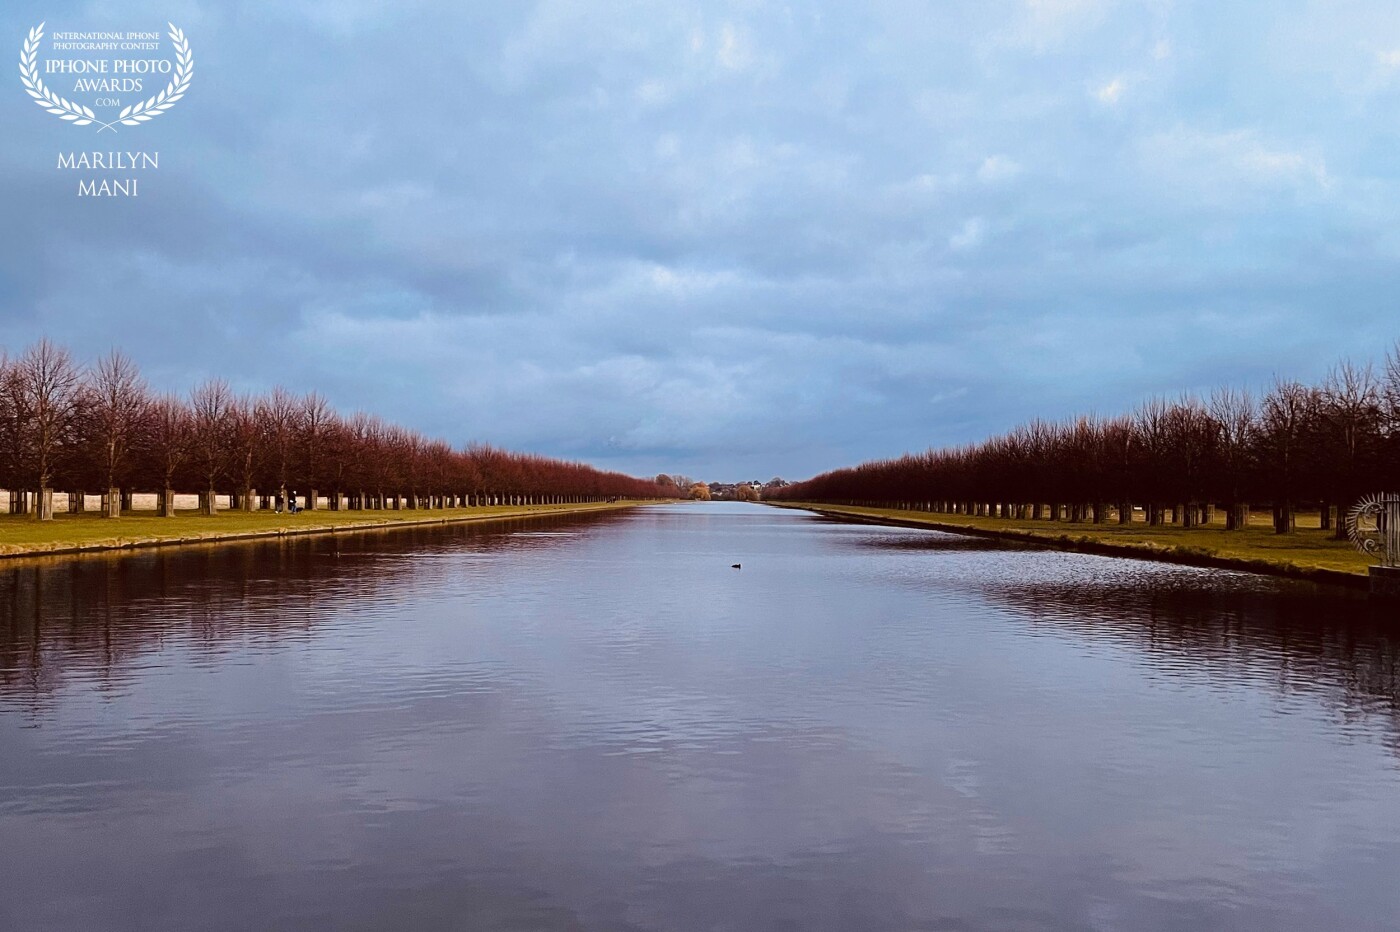 The beautiful and serene Long Water - a garden canal at the Home park, Hampton Court, UK. The symmetry on either sides and the sheer length of the canal makes this scene so beautiful even in the winter months.